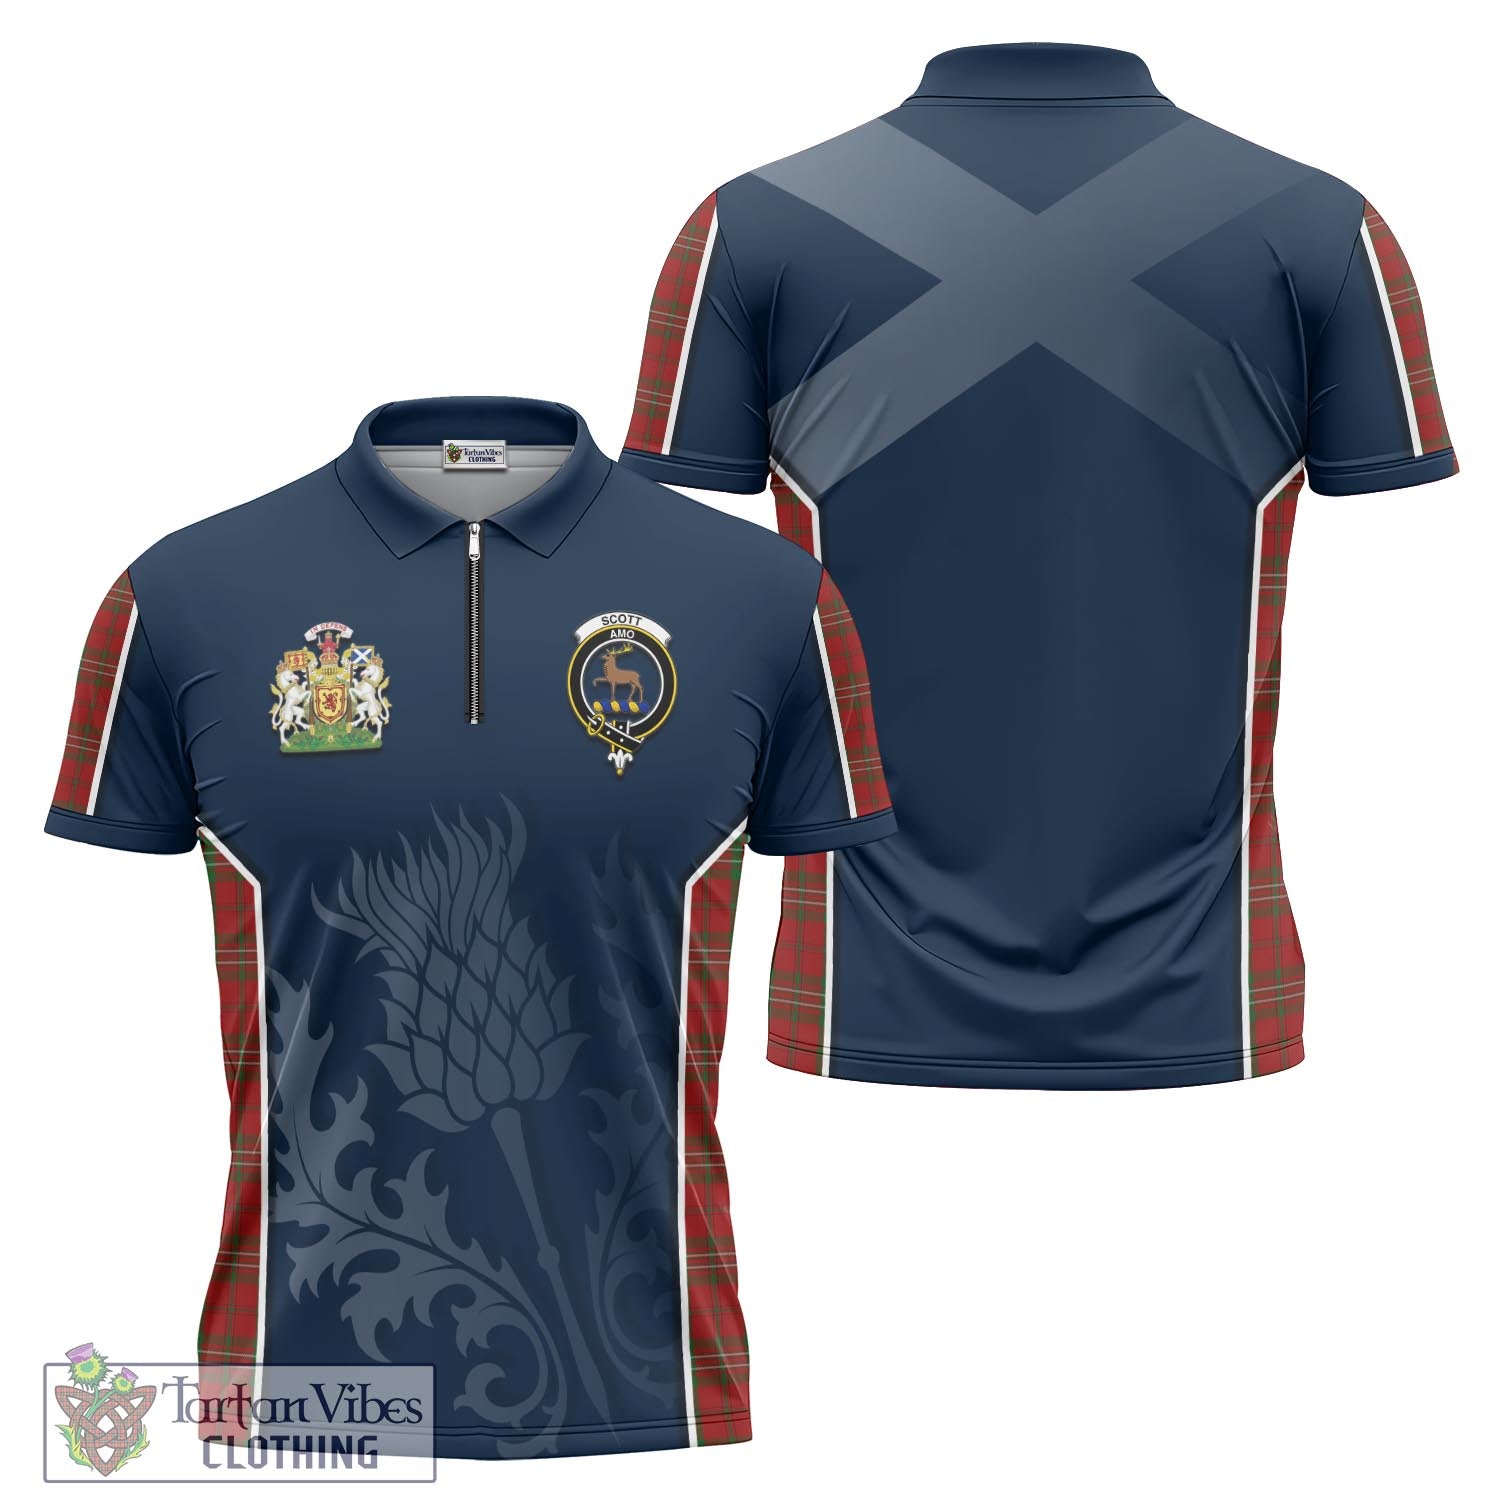 Tartan Vibes Clothing Scott Tartan Zipper Polo Shirt with Family Crest and Scottish Thistle Vibes Sport Style